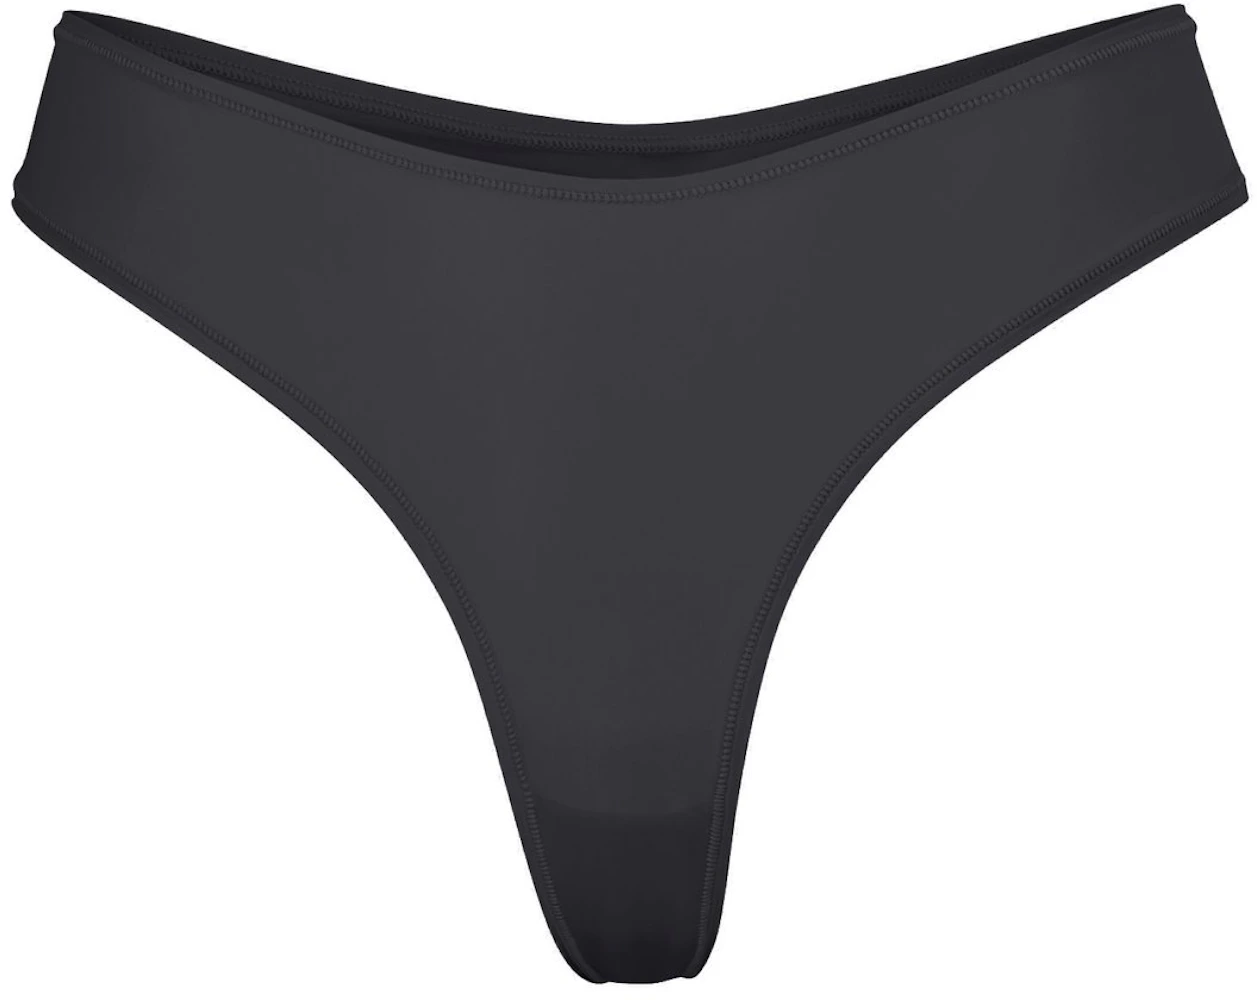 https://images.stockx.com/images/SKIMS-Jelly-Sheer-Dipped-Thong-Onyx.jpg?fit=fill&bg=FFFFFF&w=700&h=500&fm=webp&auto=compress&q=90&dpr=2&trim=color&updated_at=1611607154